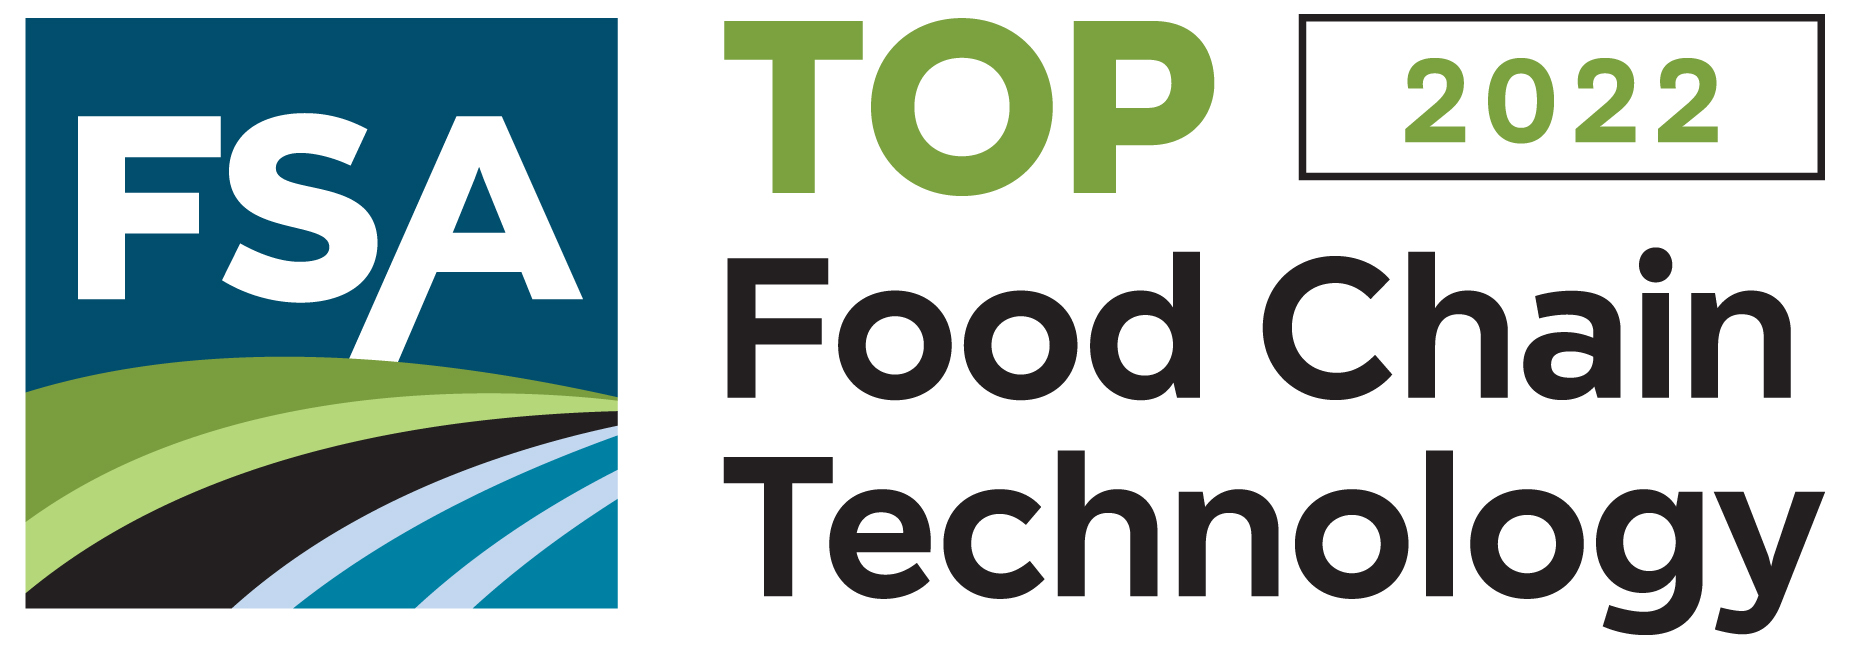 Breakthrough Named 2022 Top Food Chain Technology by Food Chain Digest